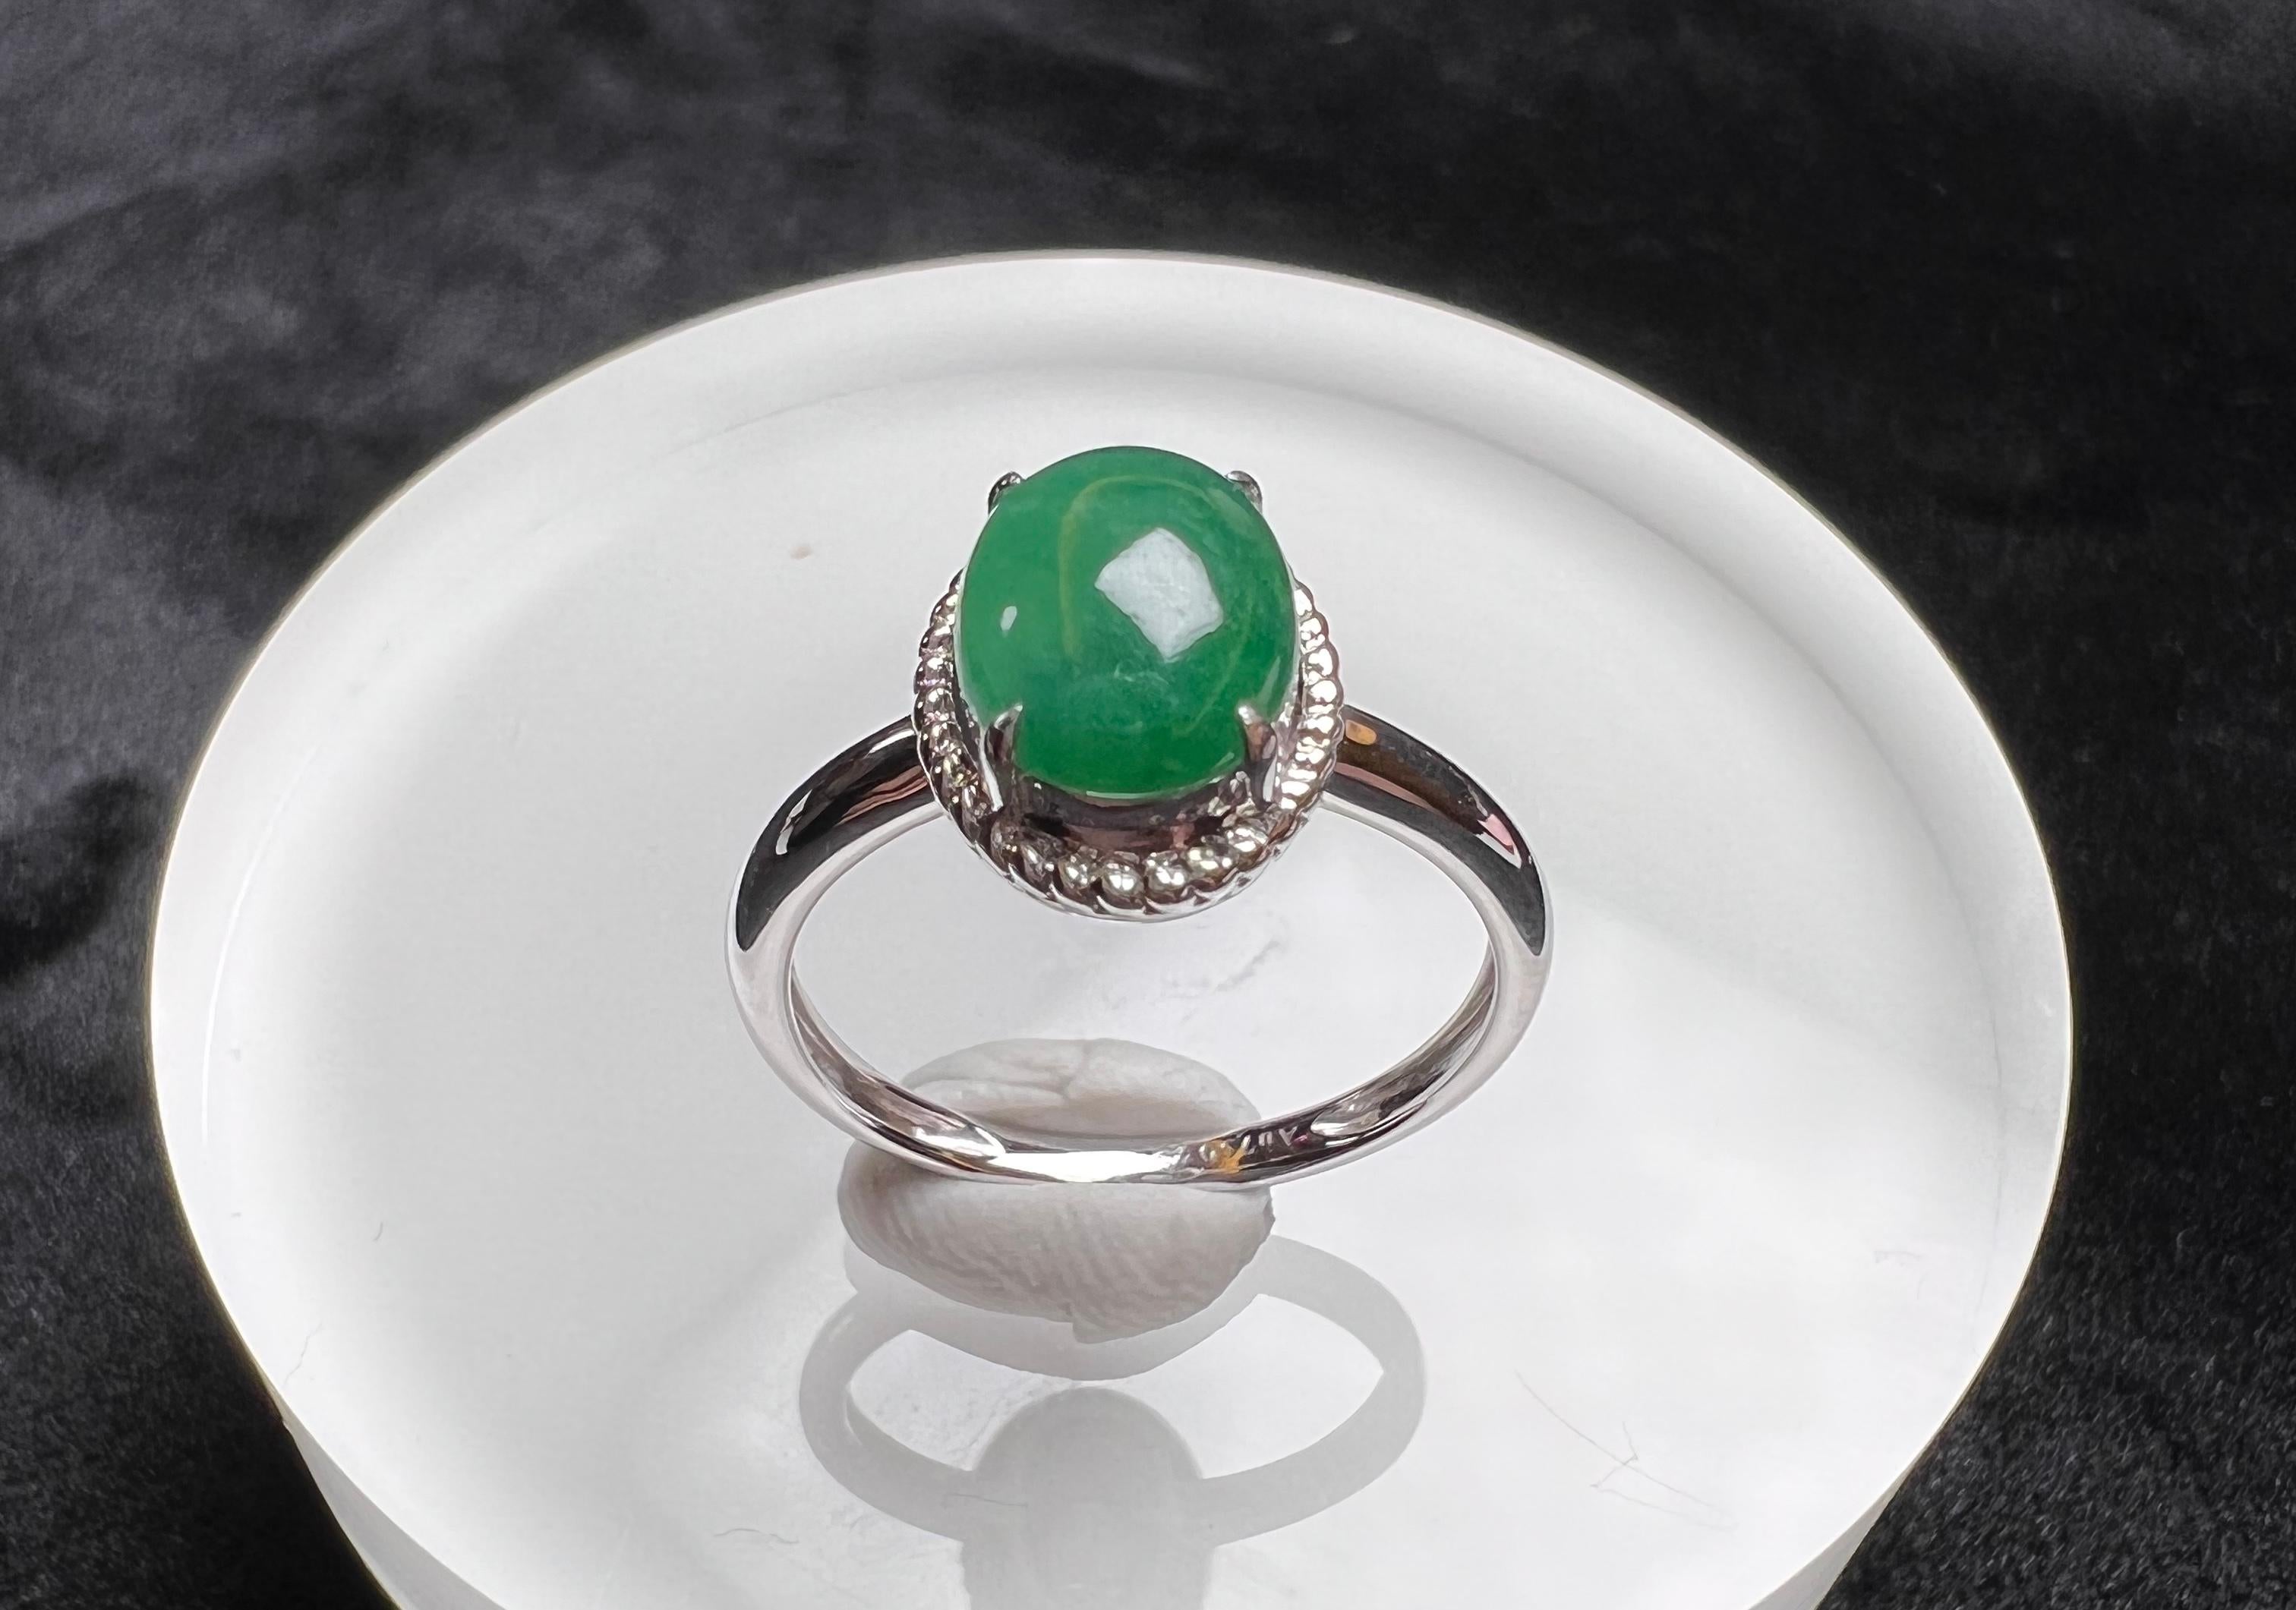 18K White Gold Oval Green Jadeite Ring, Engagement Ring

Total weight (approx.): 2.5g
Centre stone measurement (approx.): 8.8*7mm

This ring is resizable.
Get in touch with us to know more details and your shipping options.

The 18K White Gold Oval